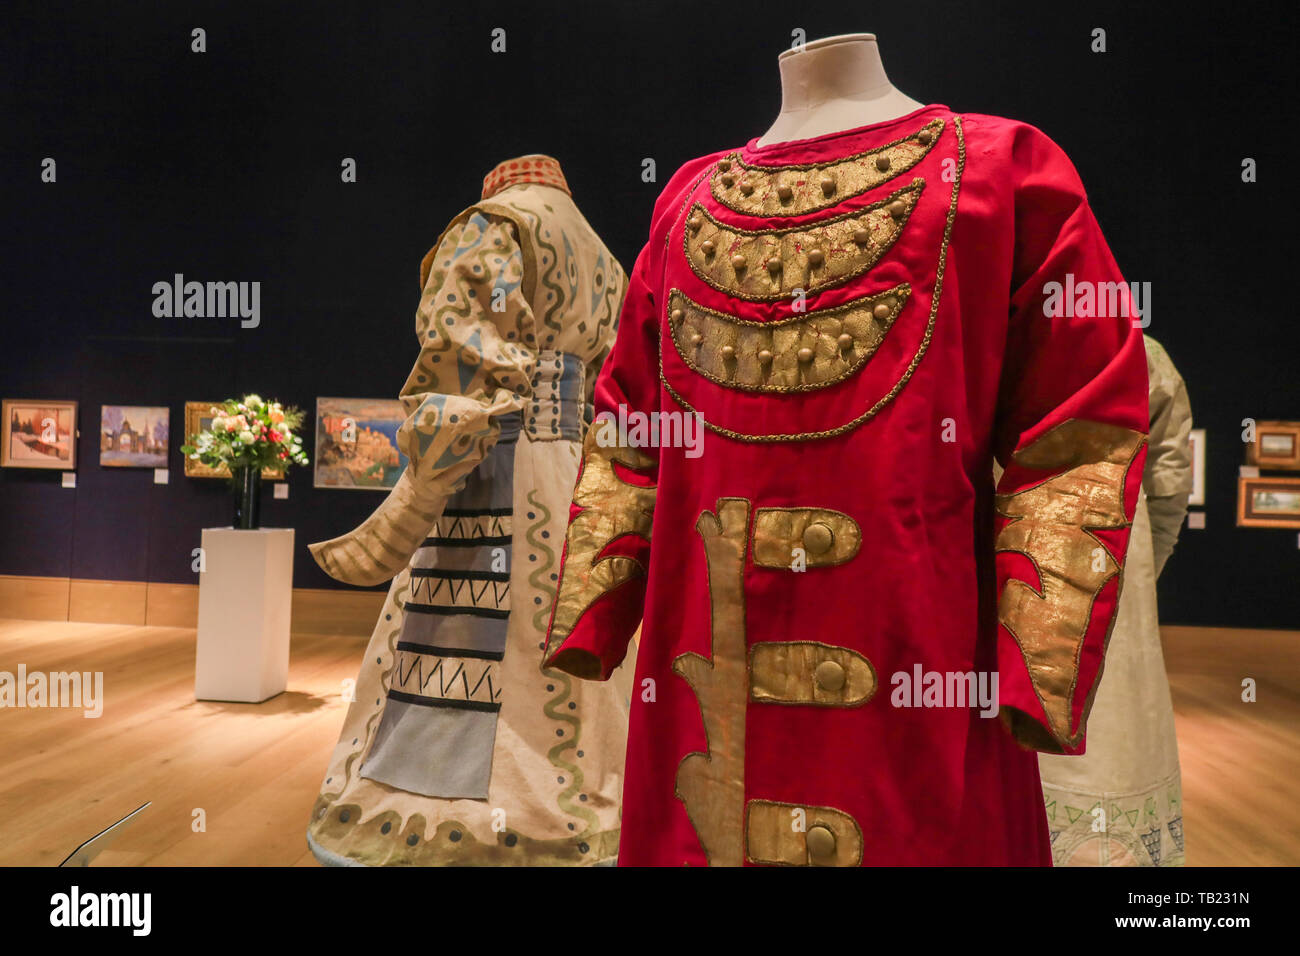 London, UK. 29th May, 2019. In Pursuit of the Firebird  Ballets Russes special Exhibition  marking the 110th anniversary of the Ballets Russes founded by Serge Diaghilev in 1909 Running during Russian Art Week. The exhibition will focus on Costumes used in The Firebird, a ballet by Igor Stravinski presented during the Ballets Russes Paris season in 1910 with music by Igor Stravinsky and the first of his many important collaborations with Diaghilev Credit: amer ghazzal/Alamy Live News Stock Photo